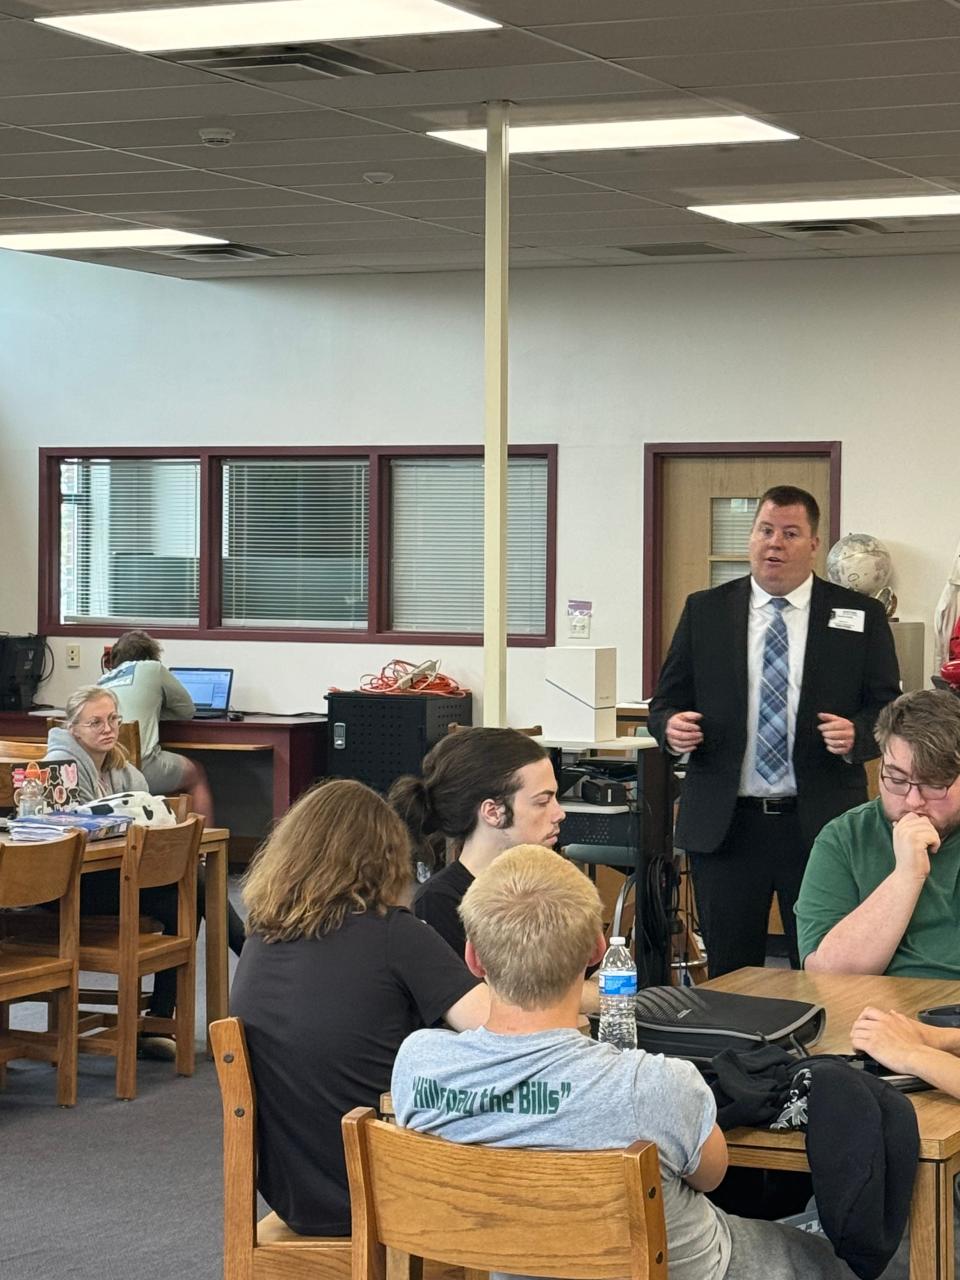 Somerset attorney David Leake discusses the judicial system with a class in the North Star School District on Law Day.